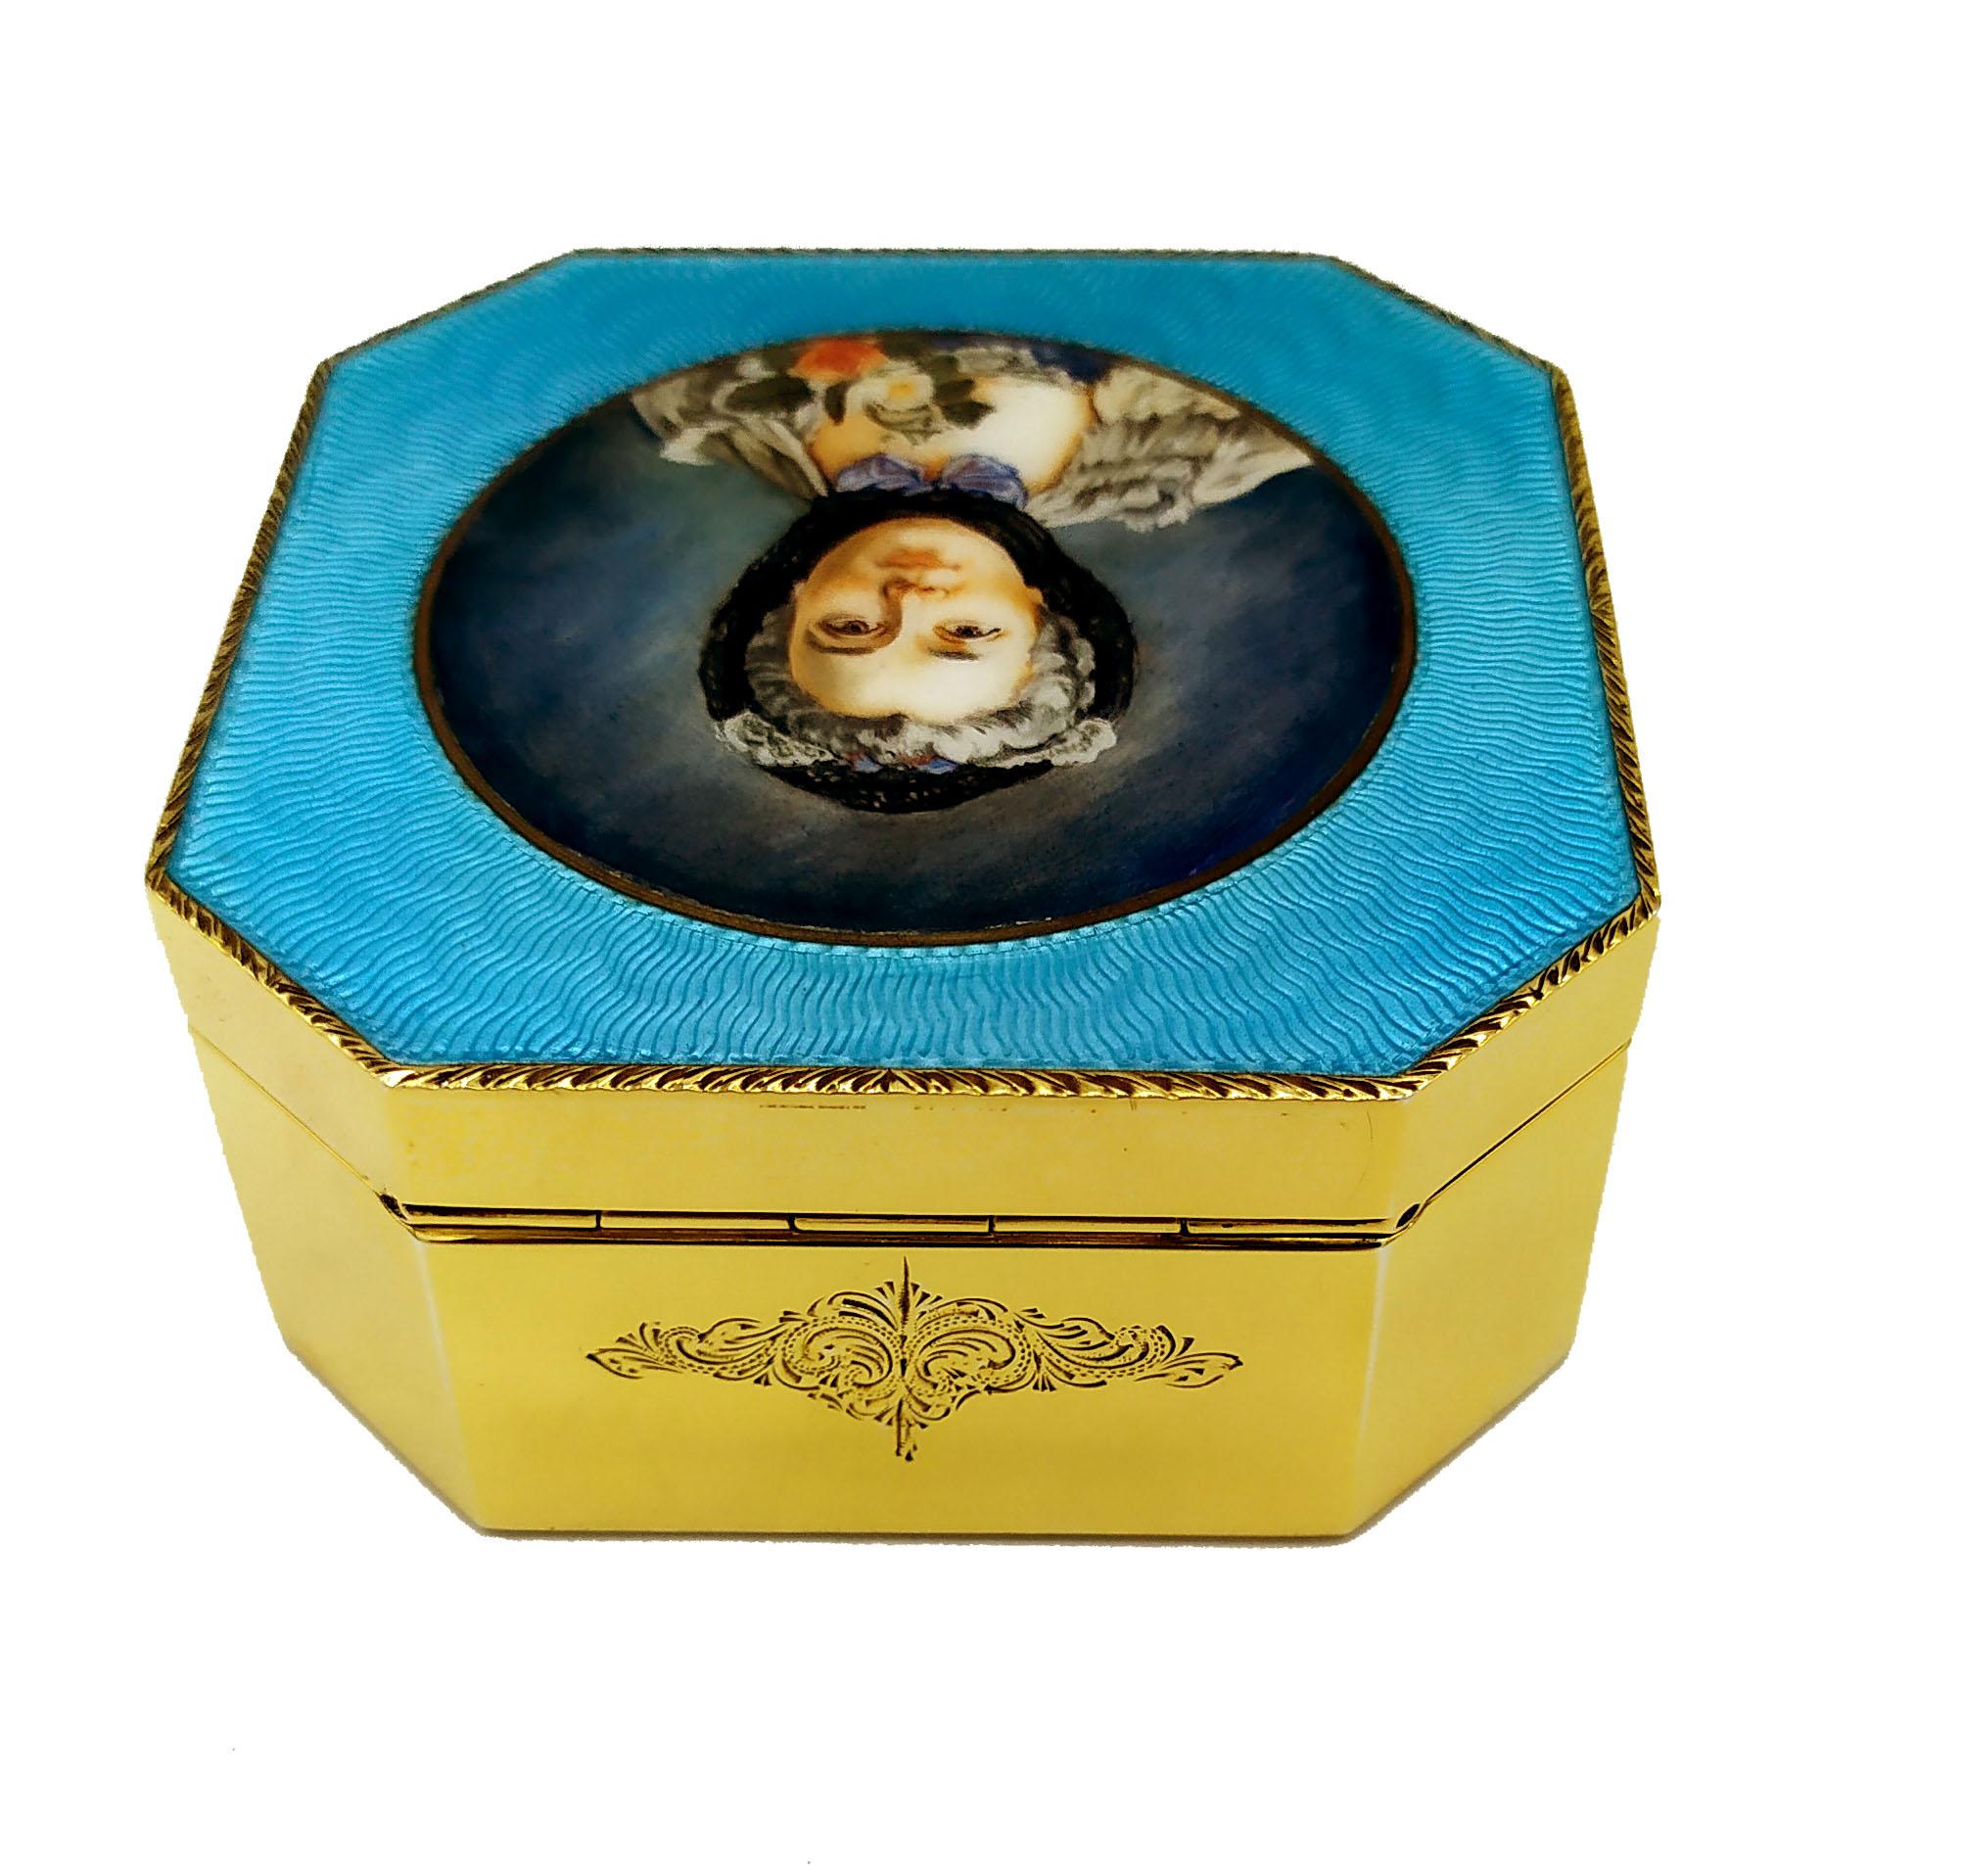 Engraved Table Box Octagonal Light Blue Fired Enamel and Miniature Madame Drouais on Sali For Sale